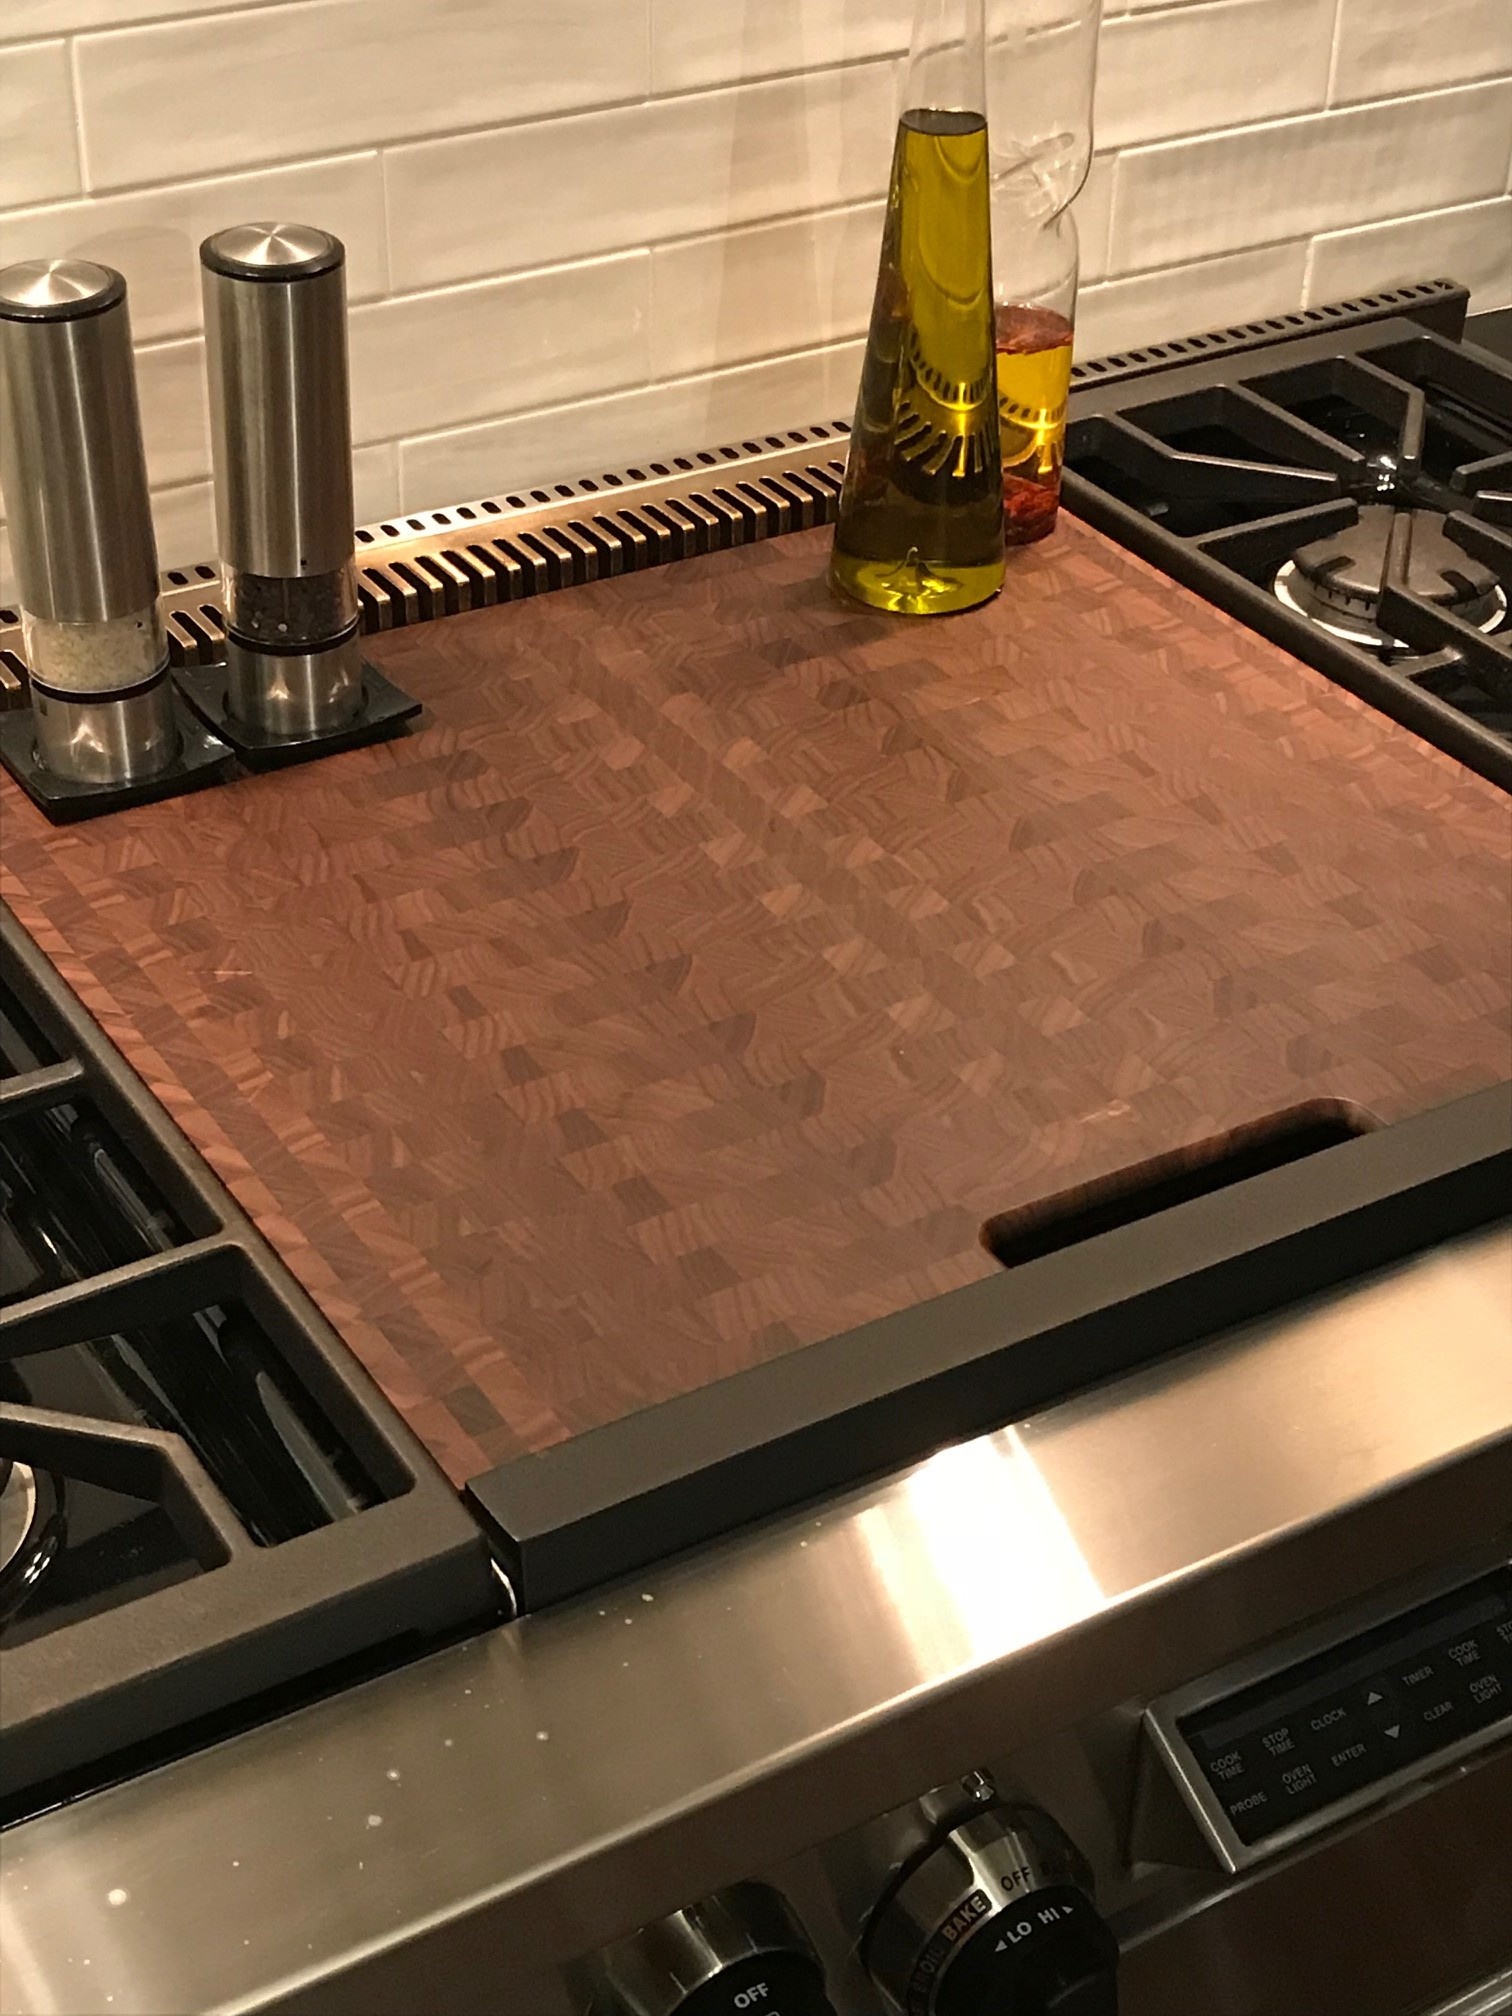 Double Griddle Inset Cover - Cutting Boards and More